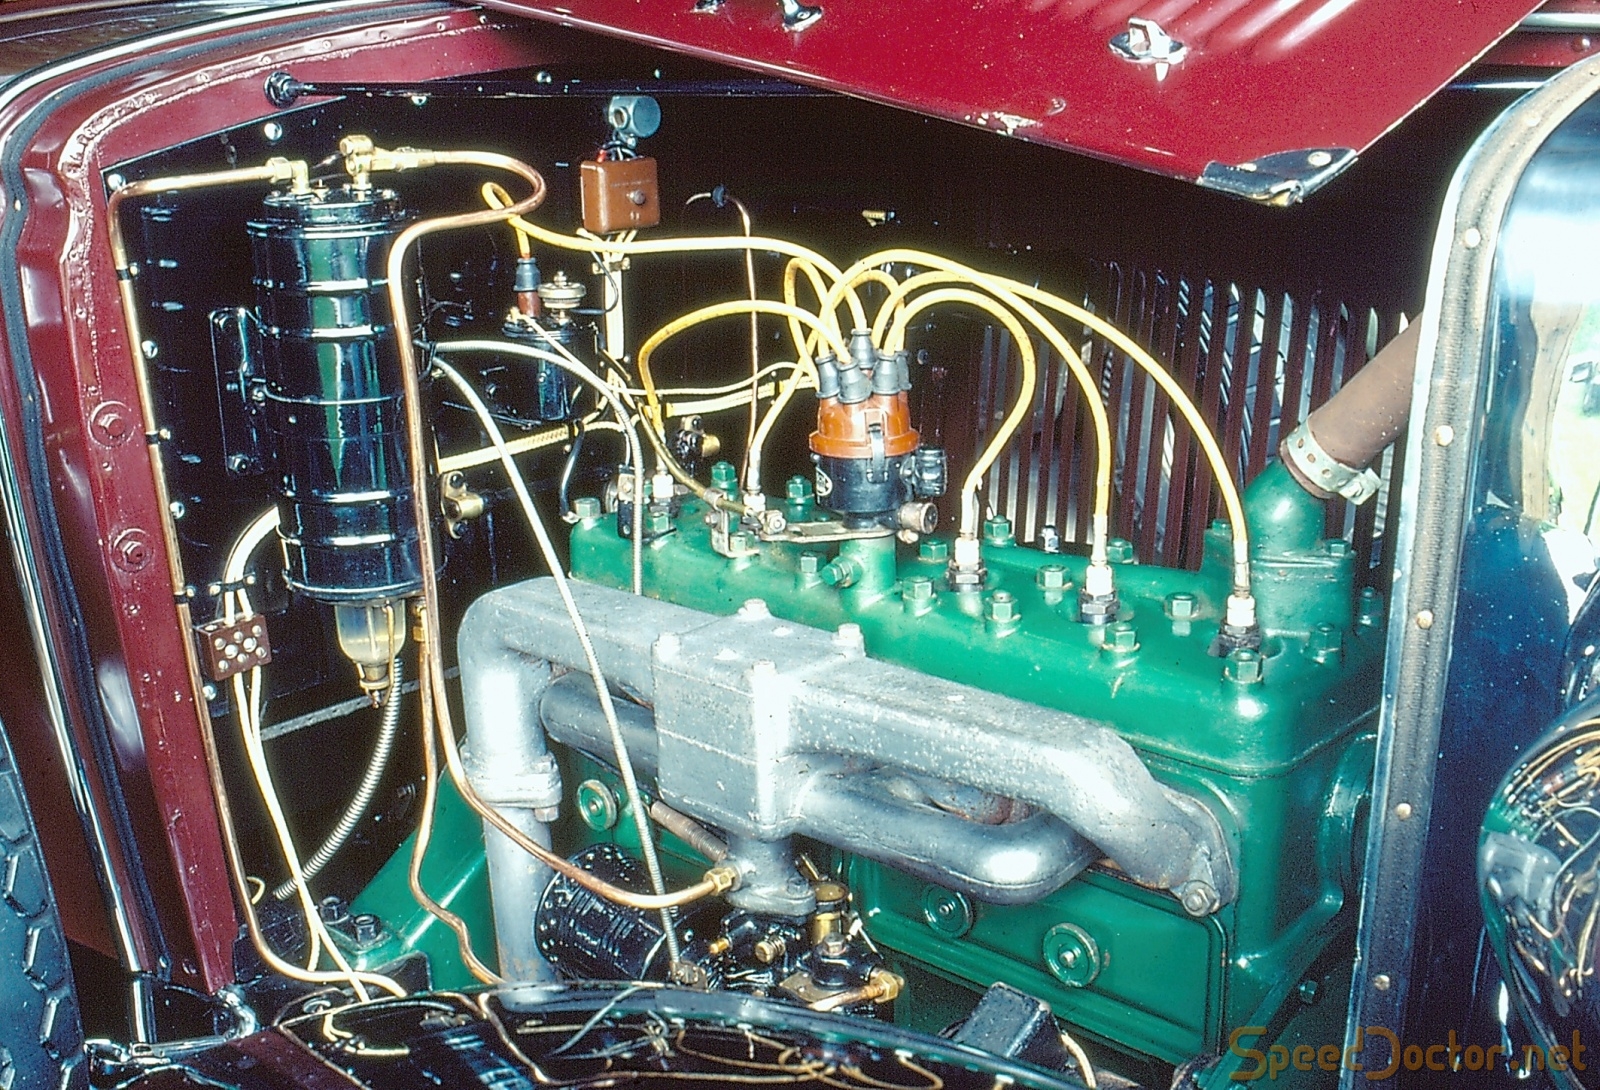 the DB engine saw the light of day fitted to the equally new Volvo PV651